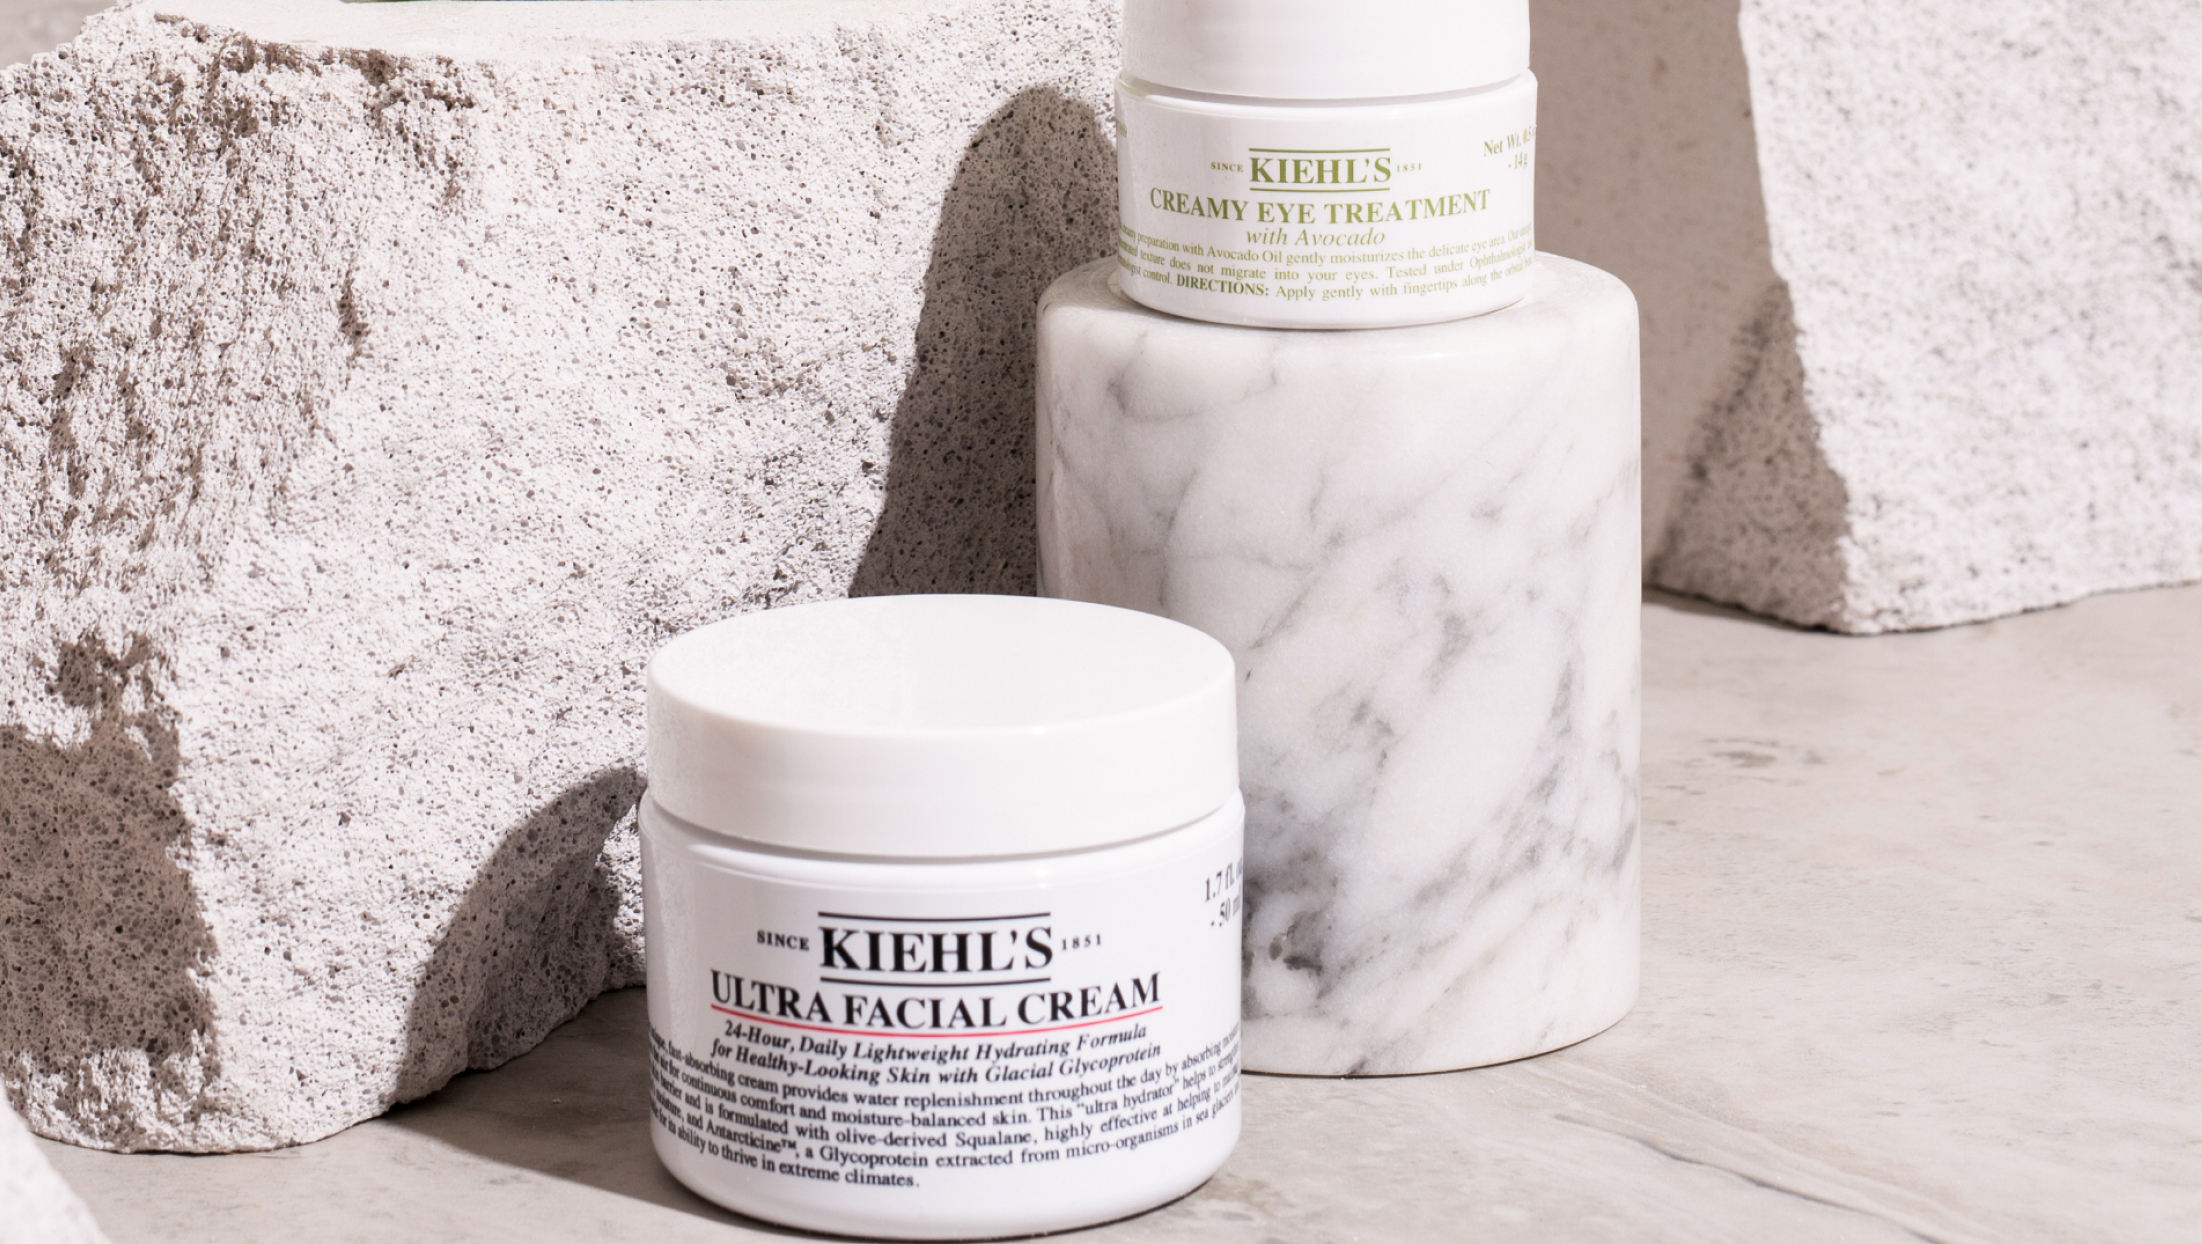 Kiehls Products for Radiant Skin